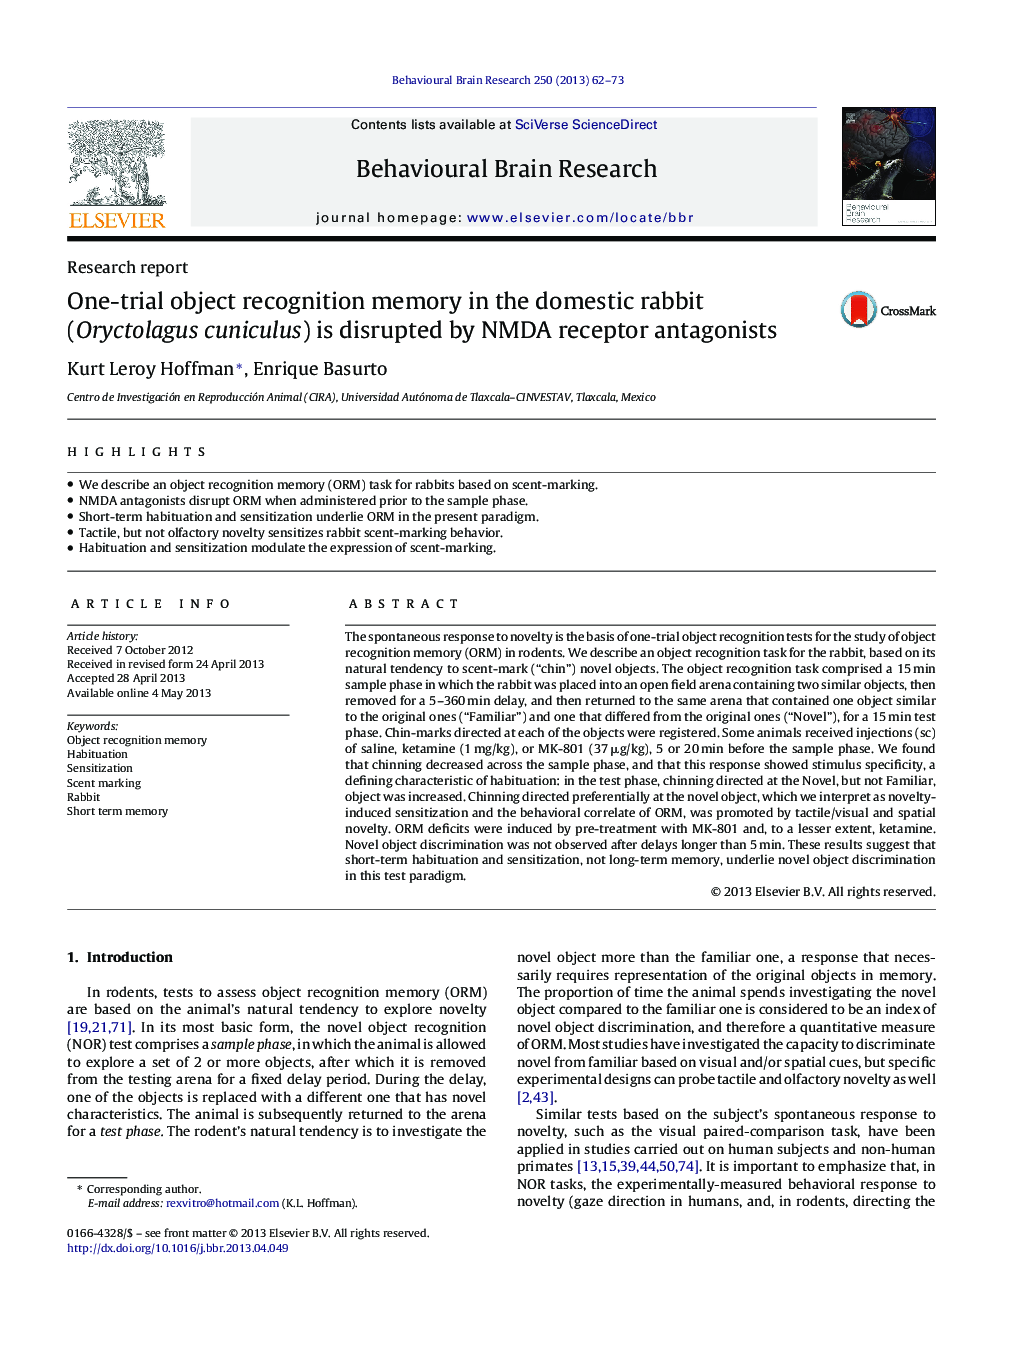 Research reportOne-trial object recognition memory in the domestic rabbit (Oryctolagus cuniculus) is disrupted by NMDA receptor antagonists